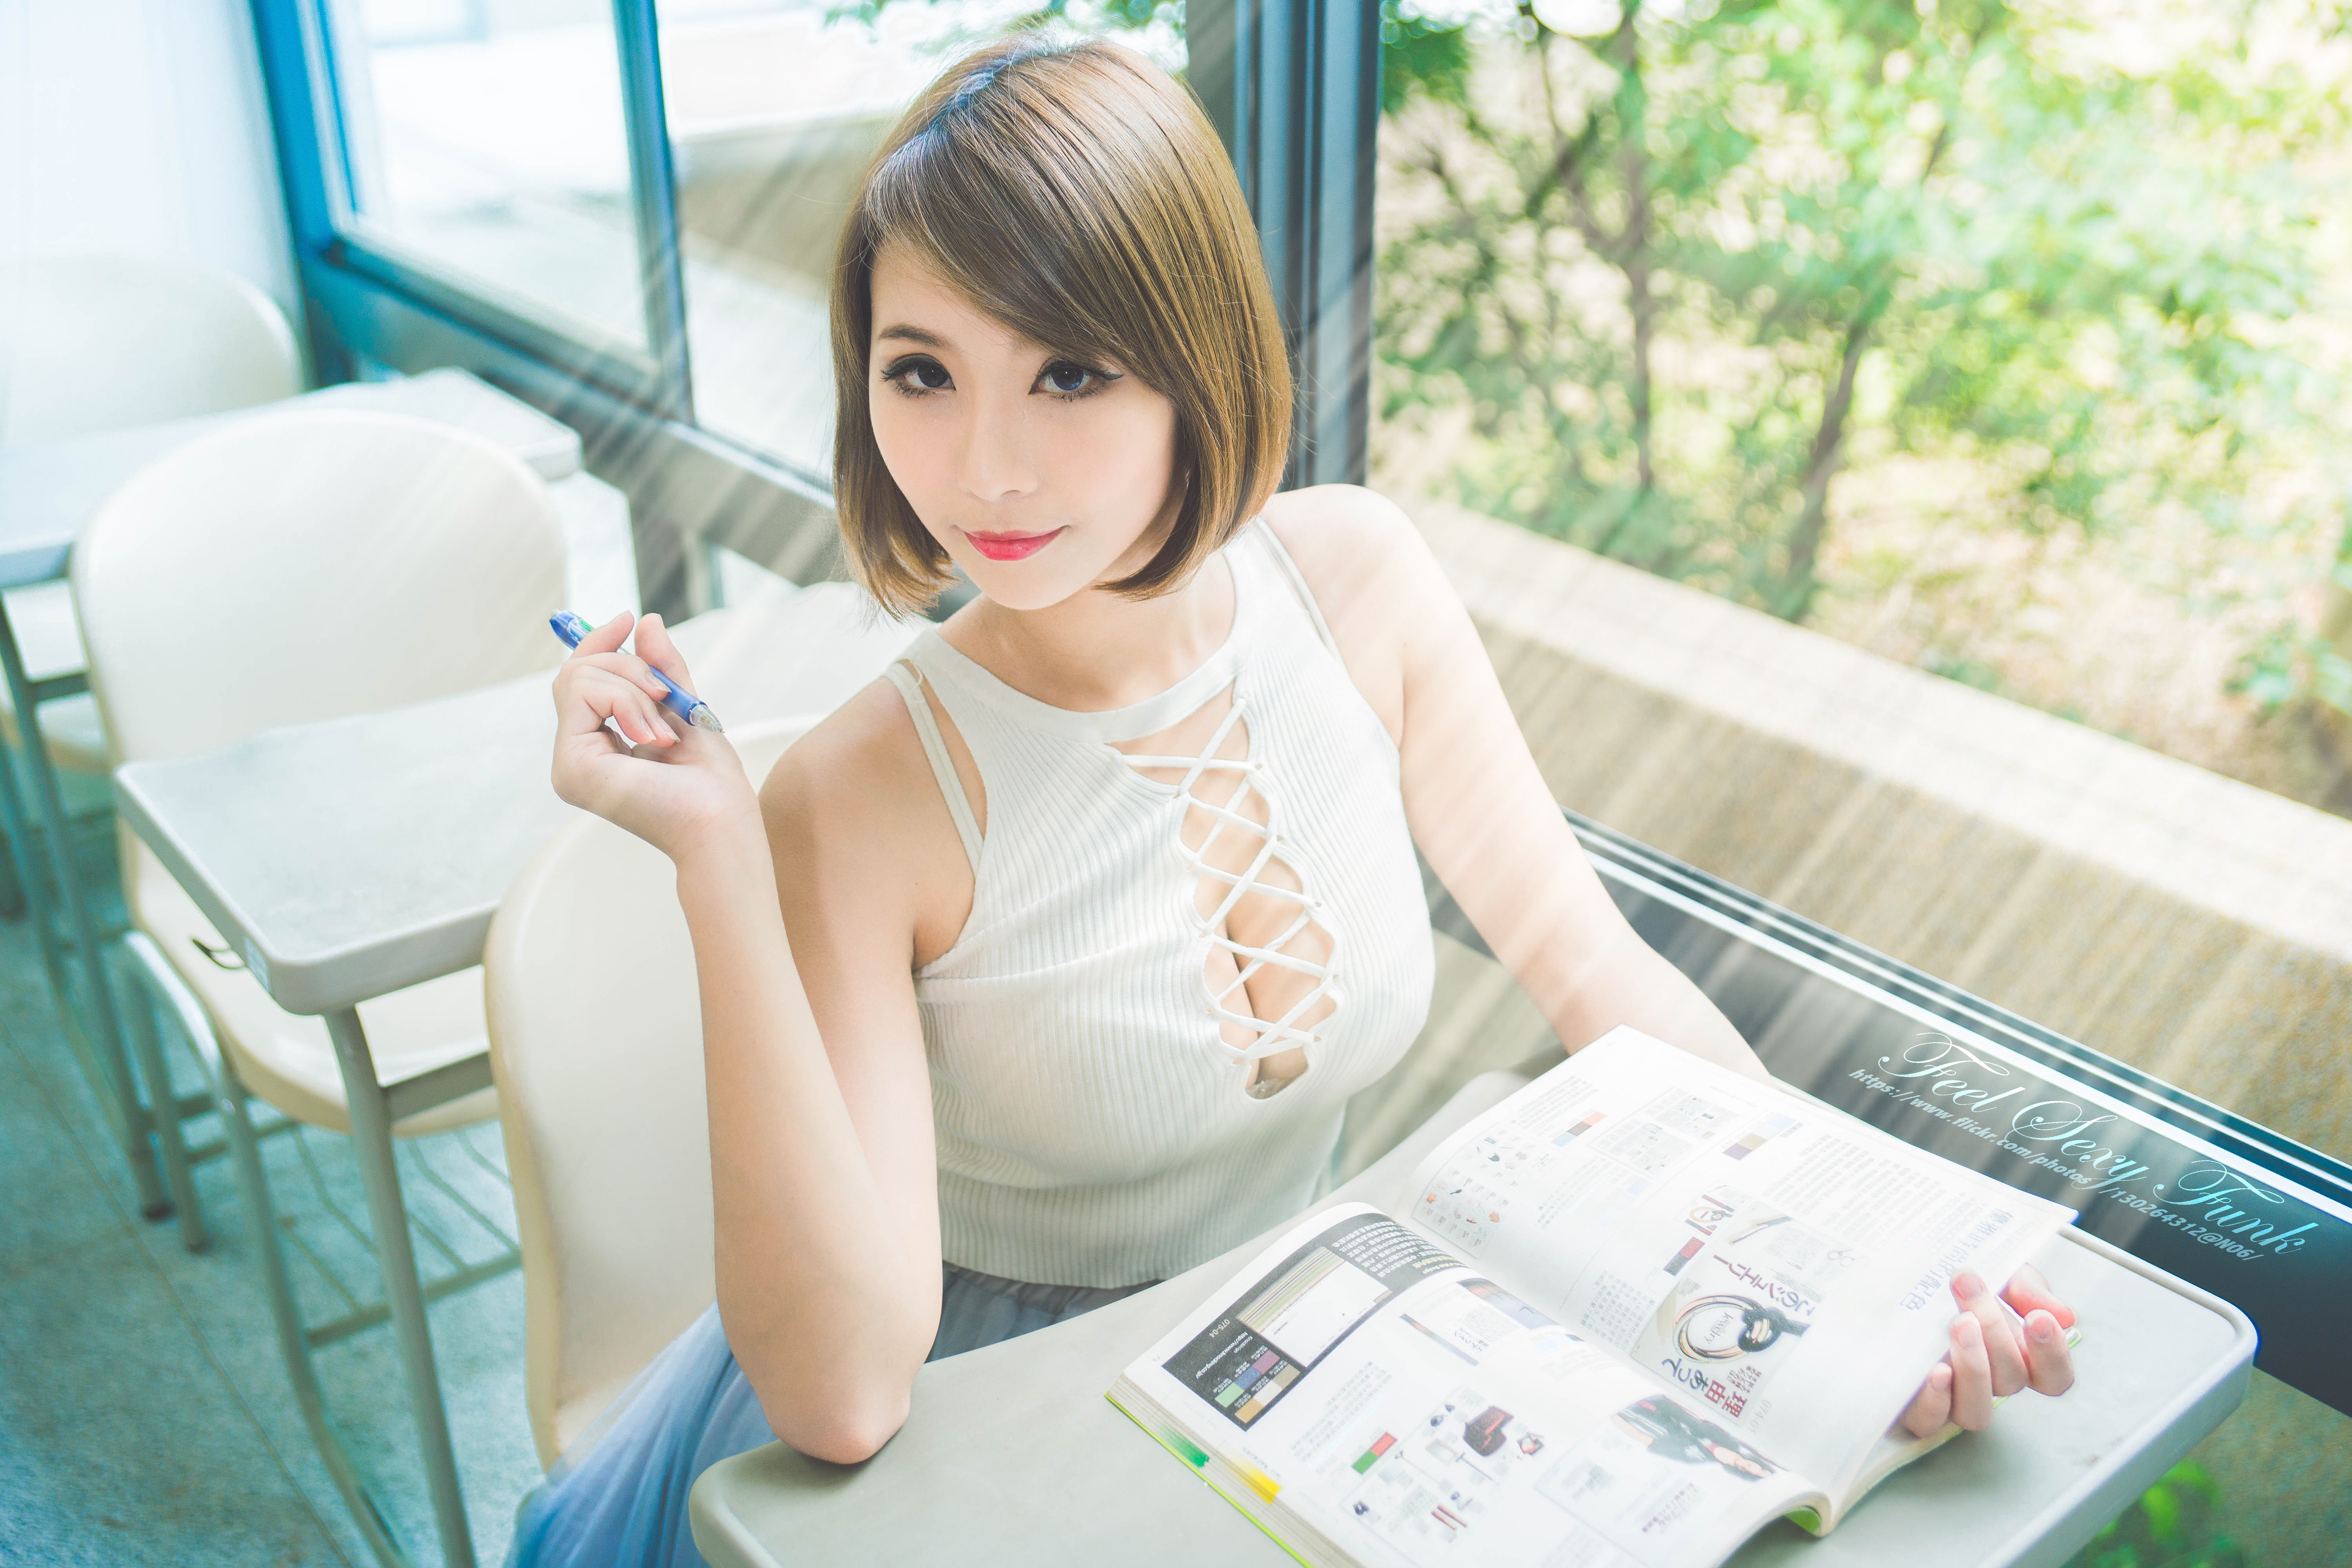 People 6000x4000 Japanese women red lipstick cleavage looking at viewer school women women indoors pens makeup brunette books sitting by the window model watermarked Asian